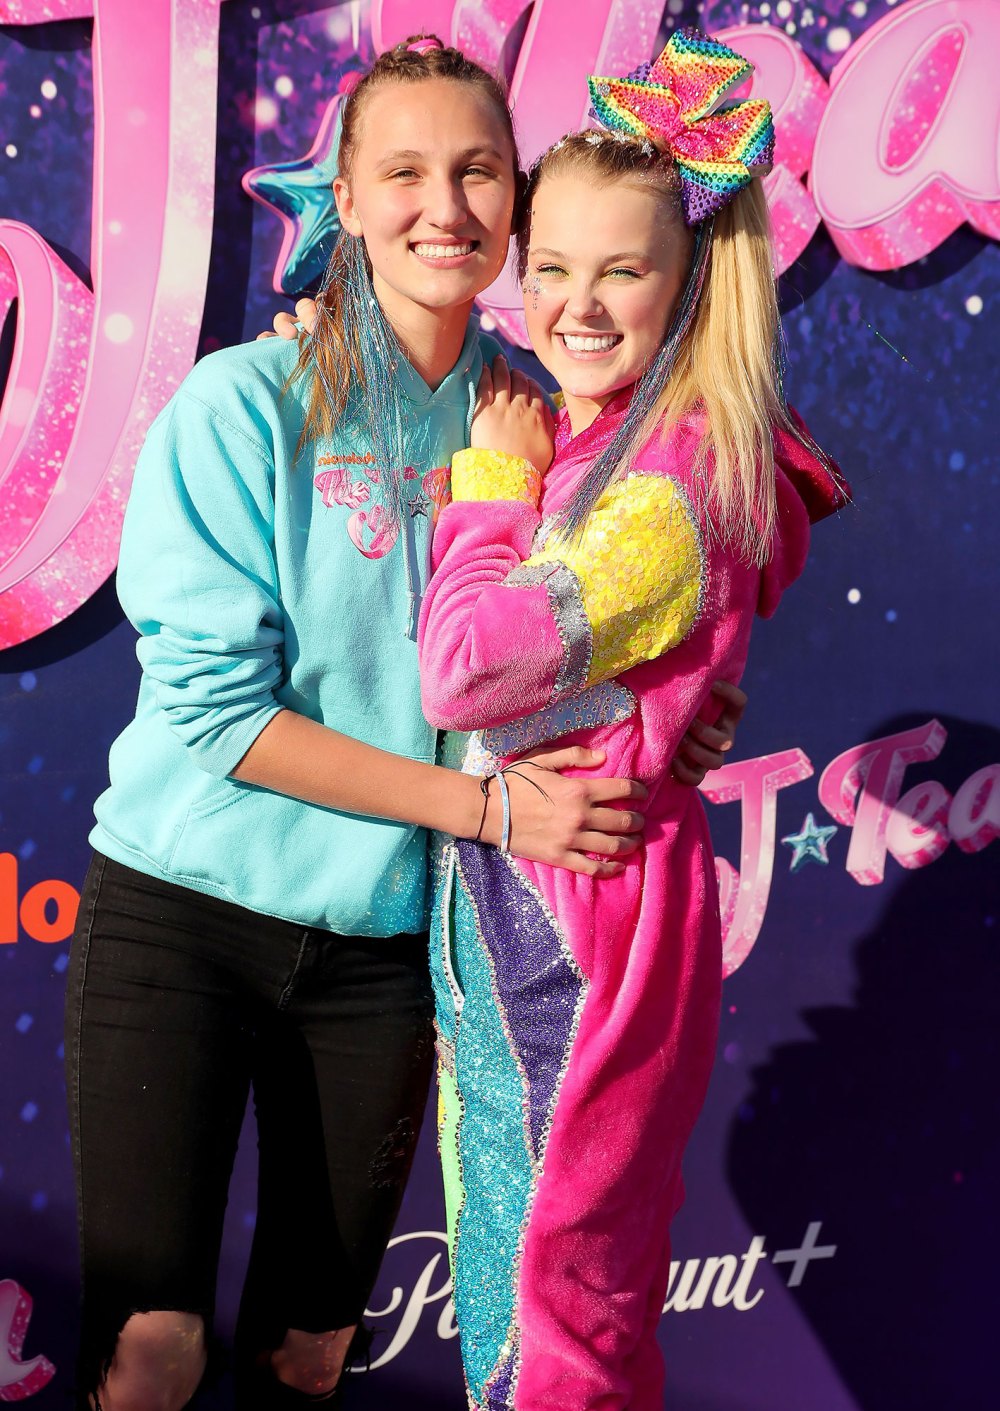 JoJo Siwa Reveals Past Situation With an Ex on Call Her Daddy Kylie Prew